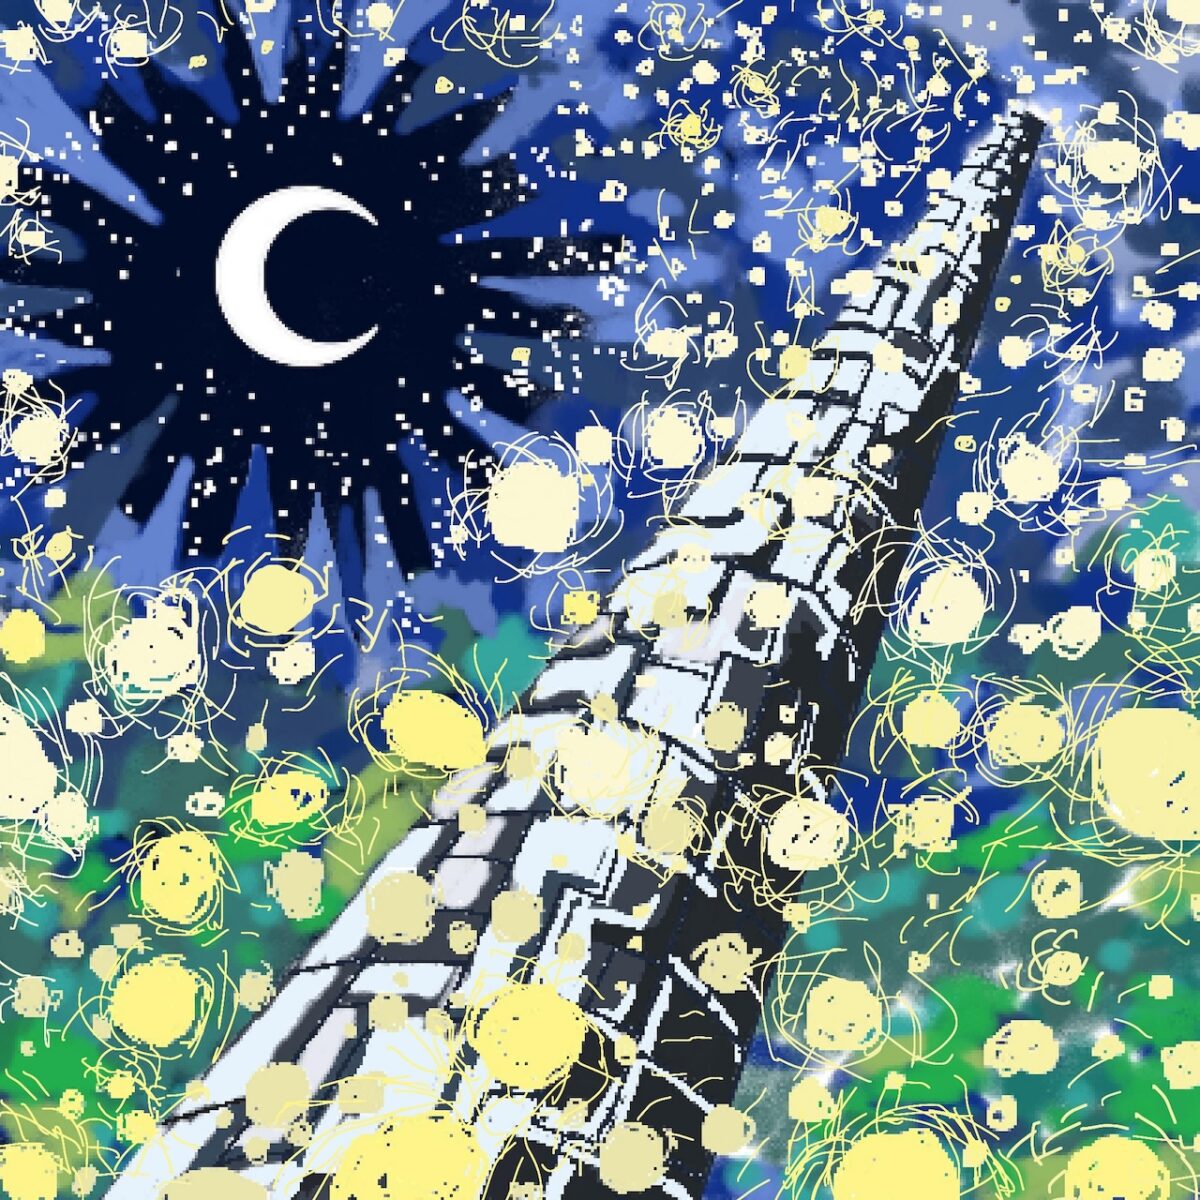 The cover for "Scattersun" by Fax Gang and Parannoul. It features a heavily stylized picture of a tower going into a starry night sky with a crescent moon.